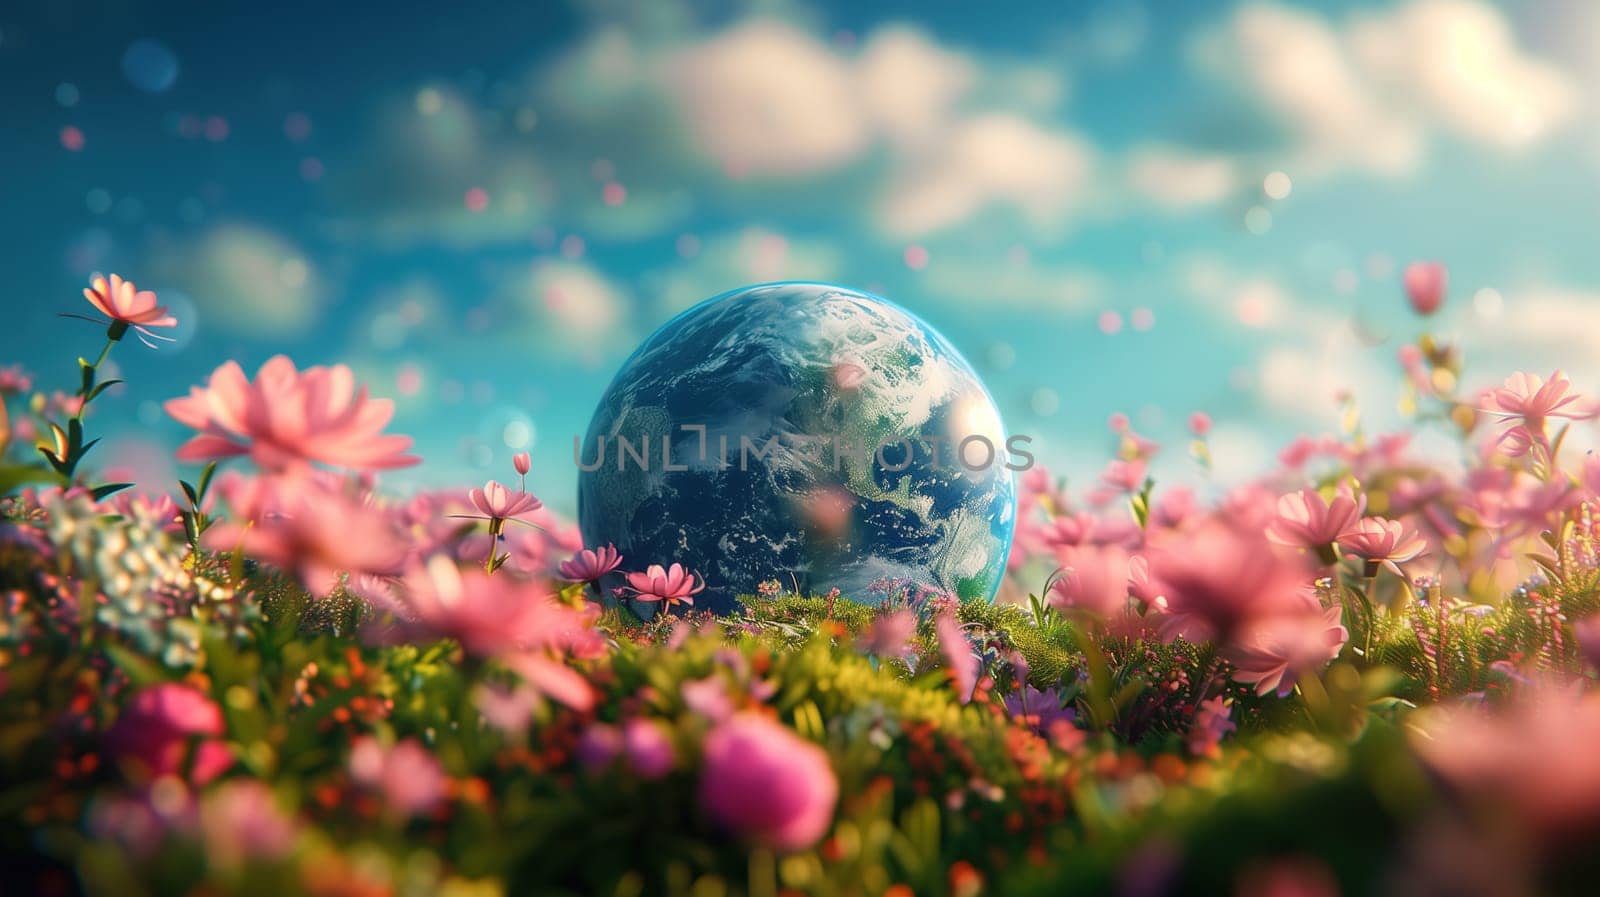 The Earth is placed amidst a field of vibrant flowers, showcasing the beauty of nature on Earth Day. The colorful flowers create a stunning backdrop for the globe.